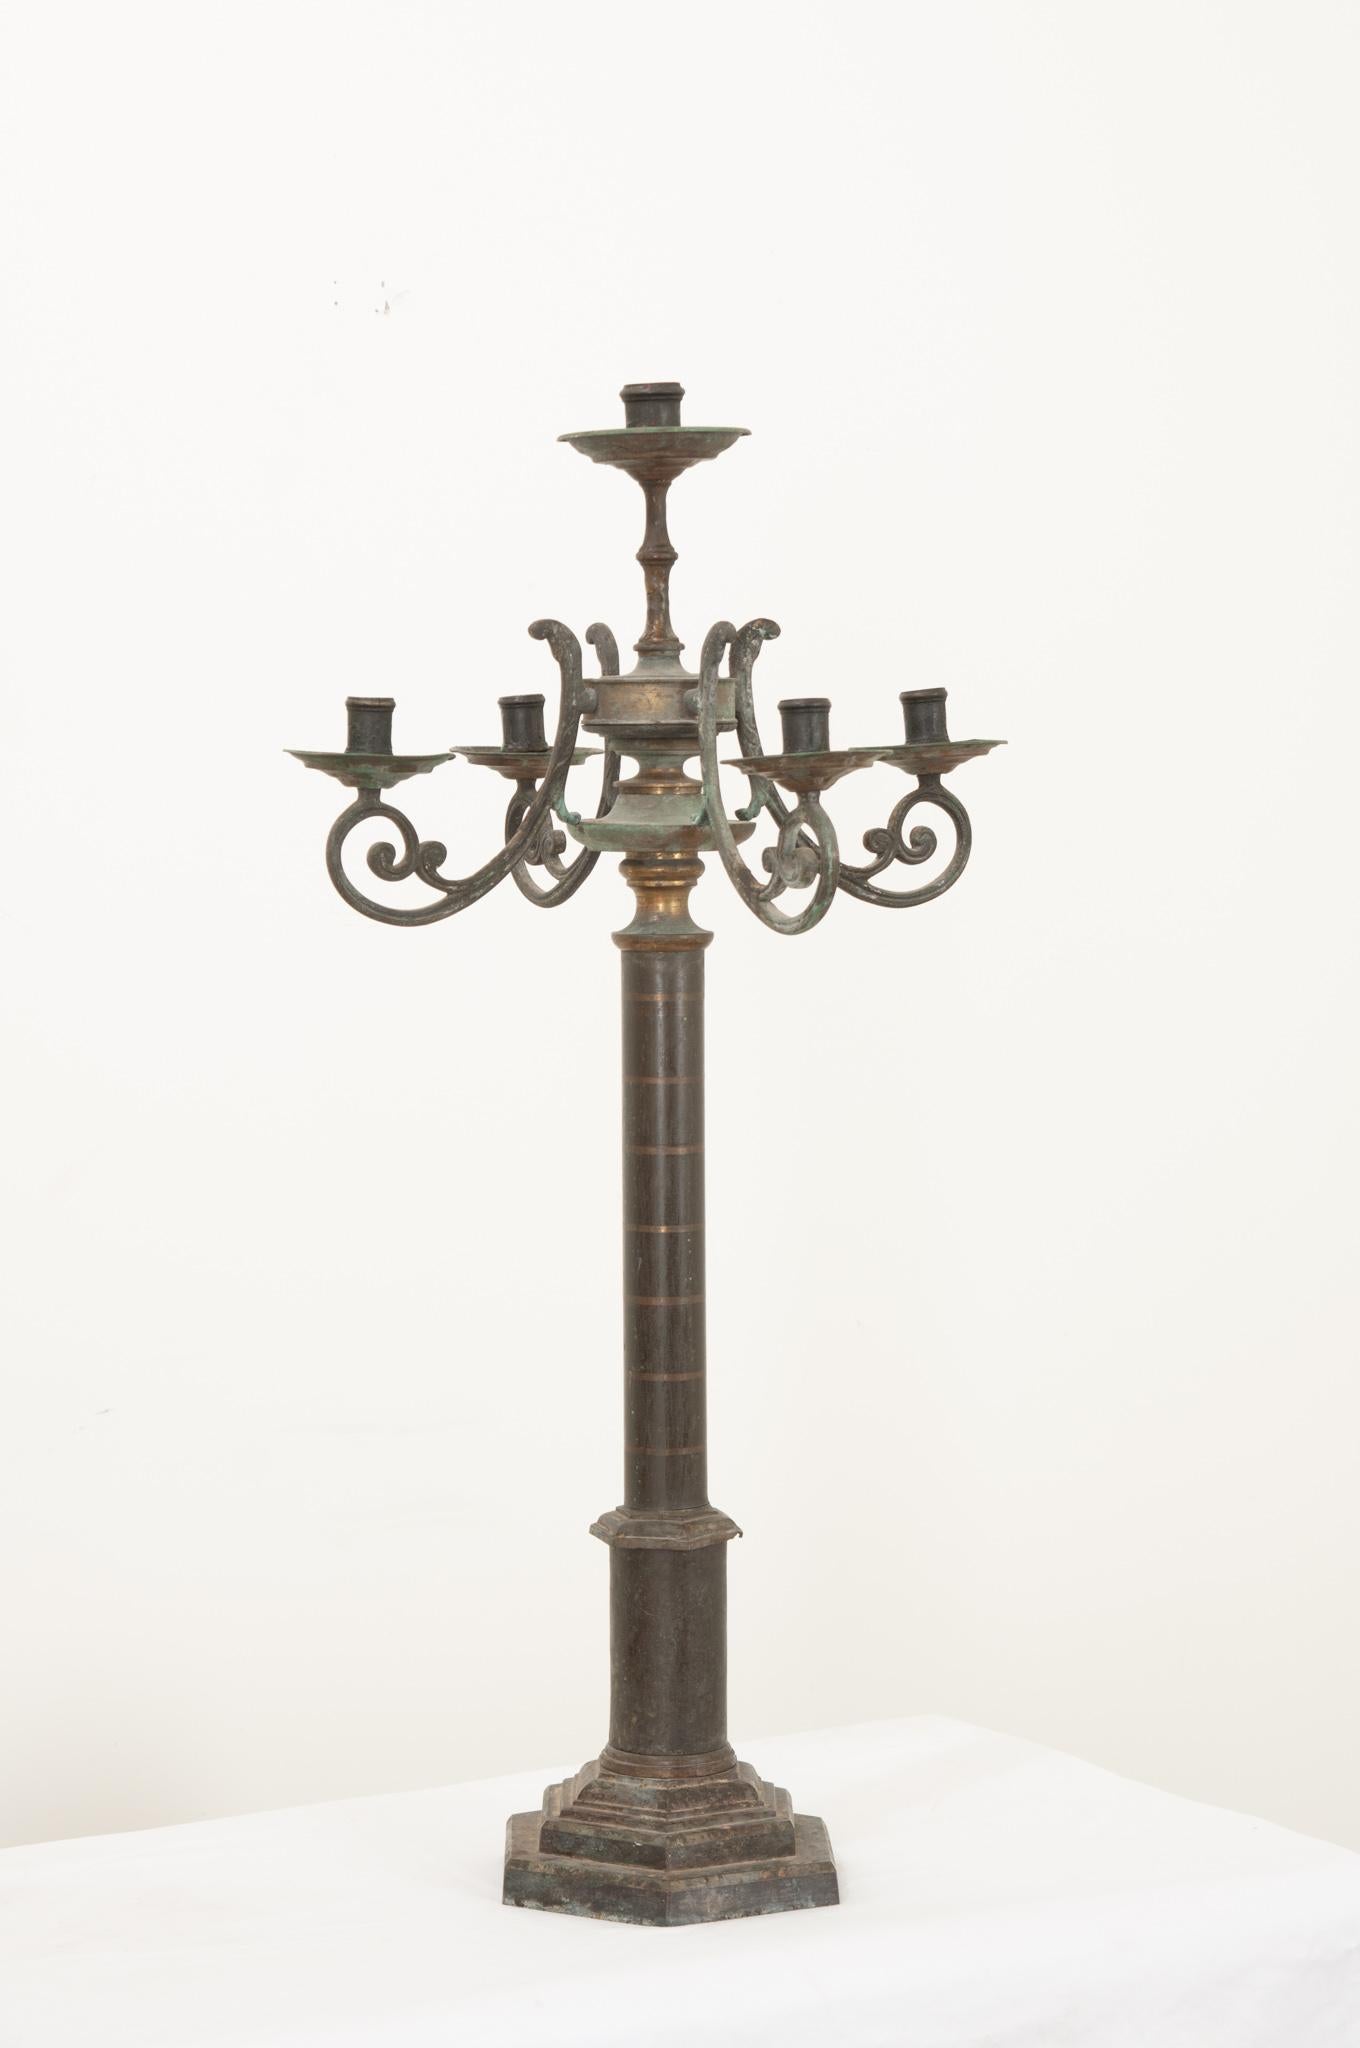 This generously sized five-arm candelabra has gained a wonderful patina since its creation during the 1890’s in France. A single arm is raised above the rest while four scrolling arms support the raiminging bobeches. The center stem subtly displays